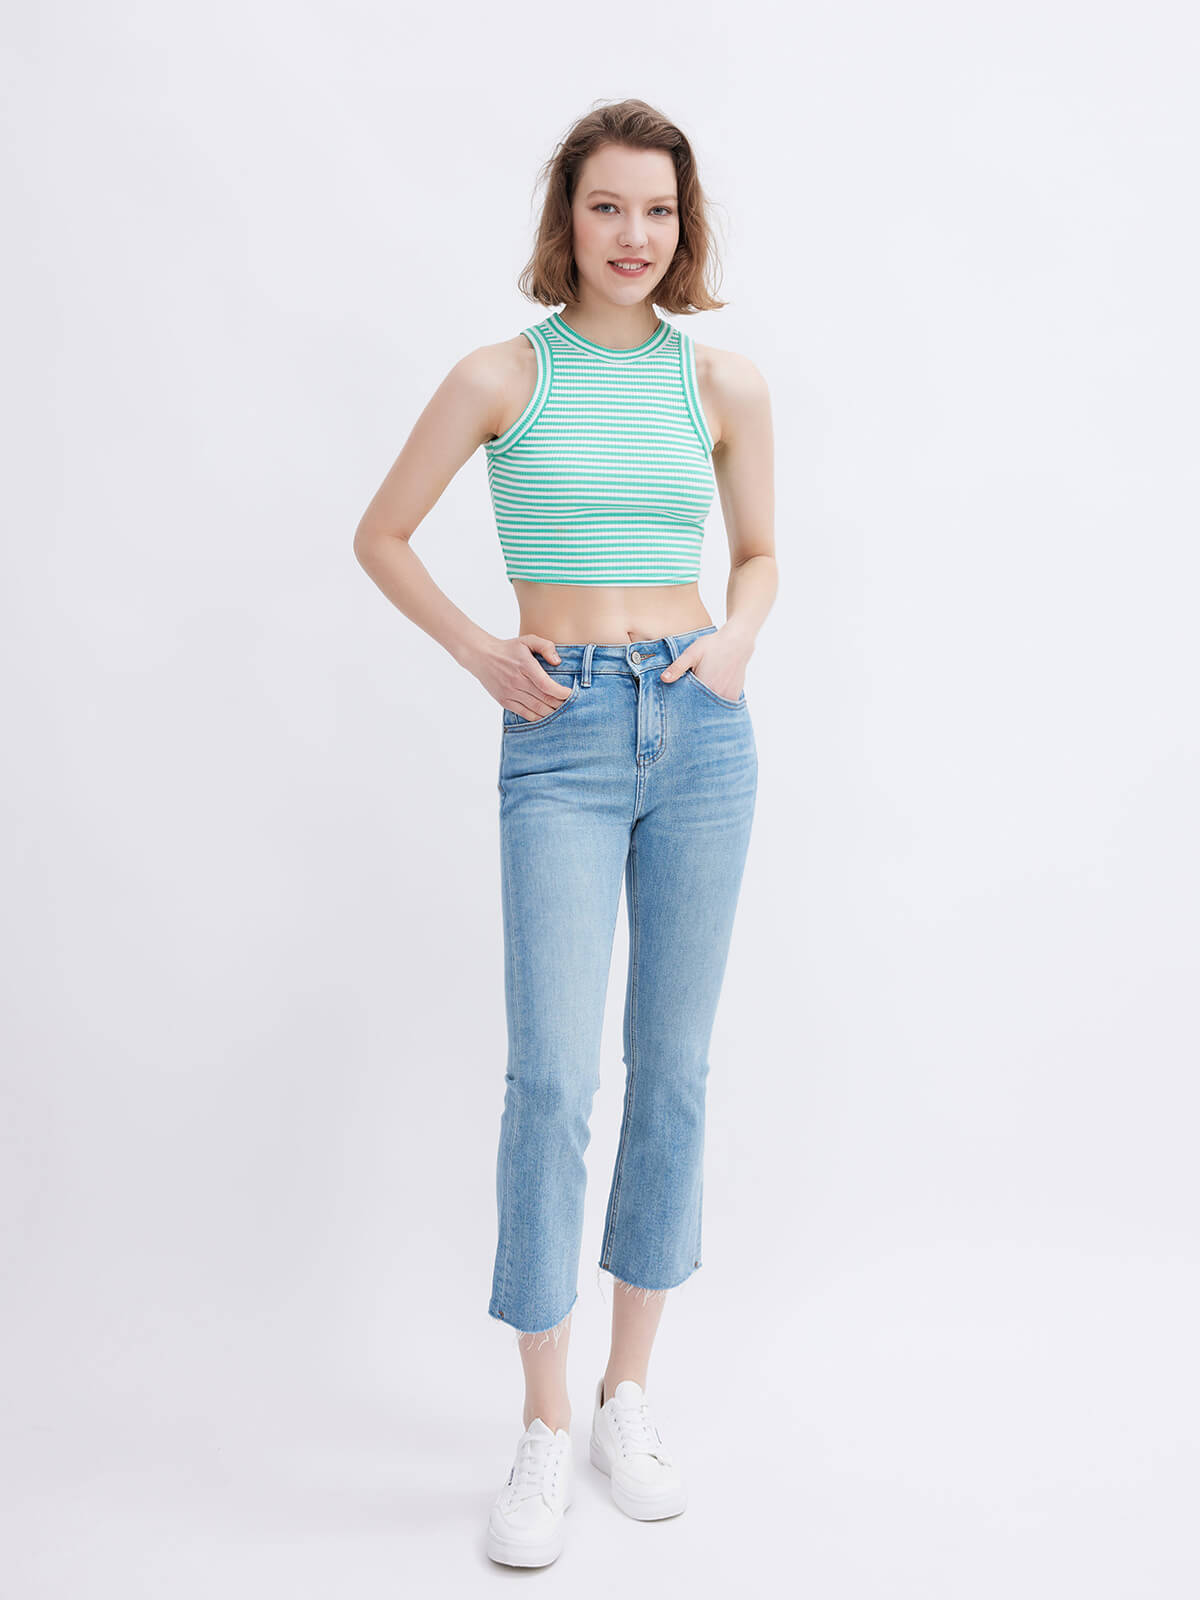 Green Stretchy Tee Top